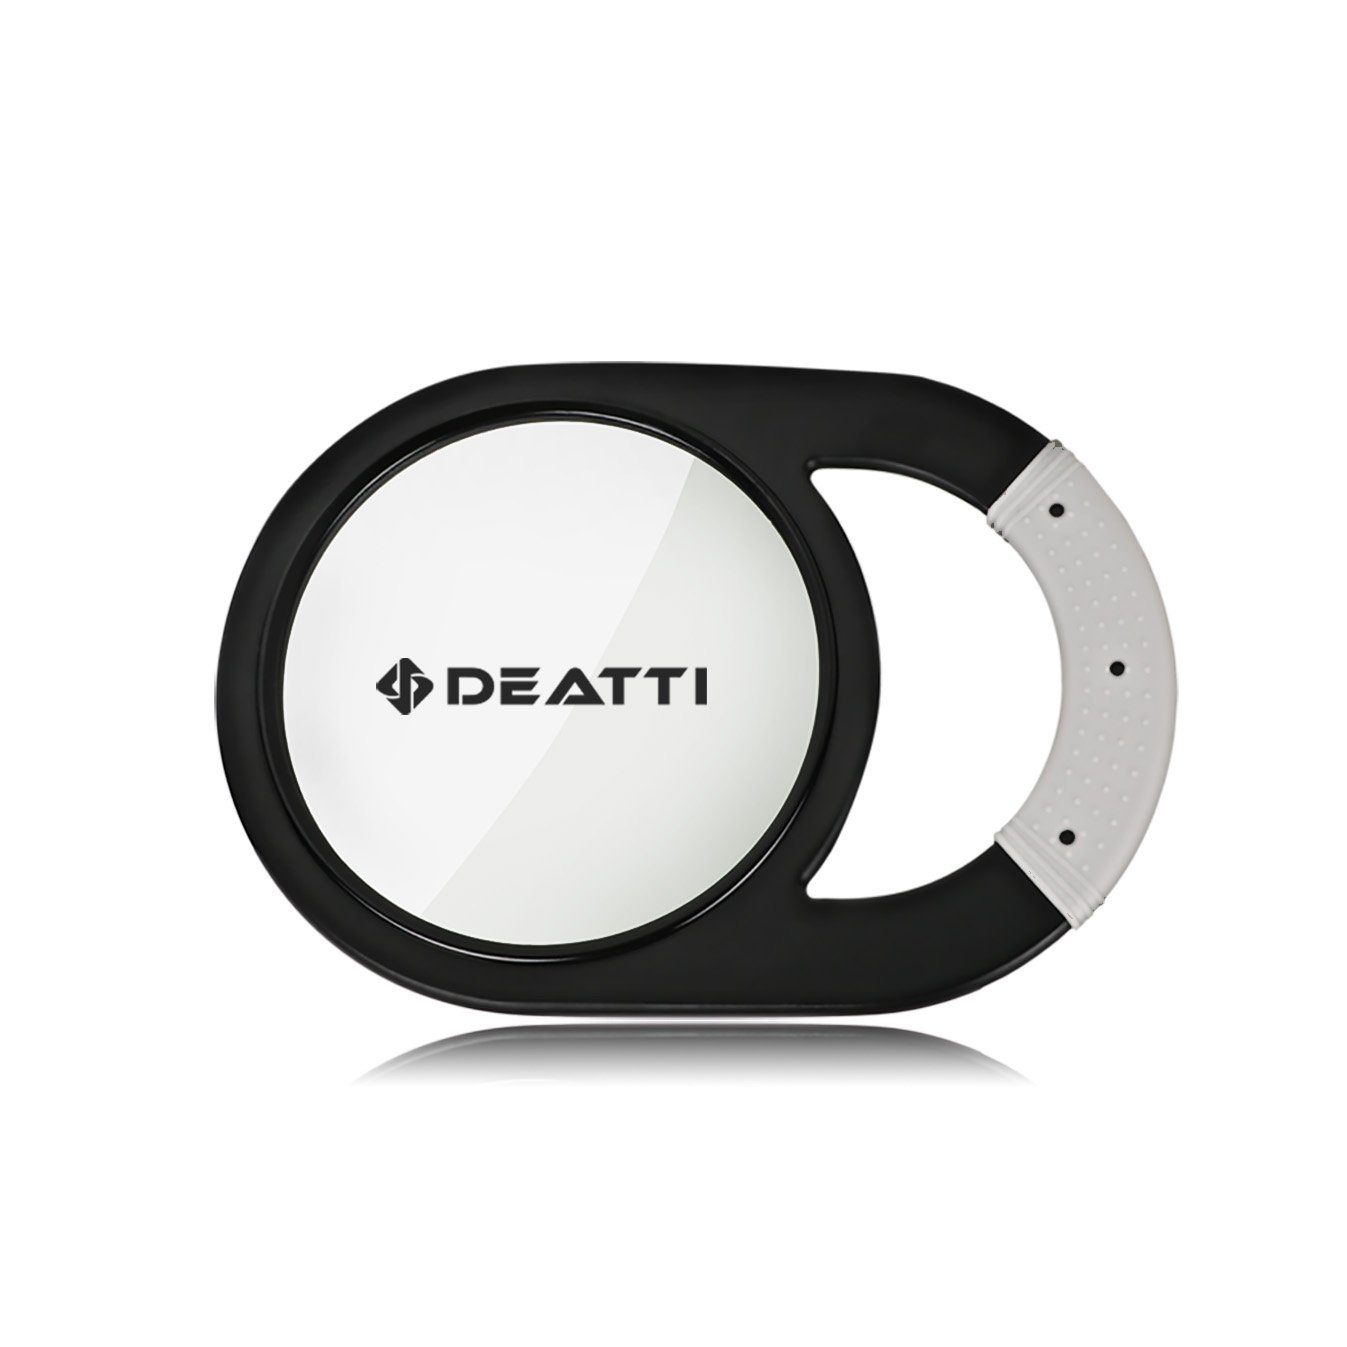  DEATTI Unbreakable Hand Mirror with Silicone Handle